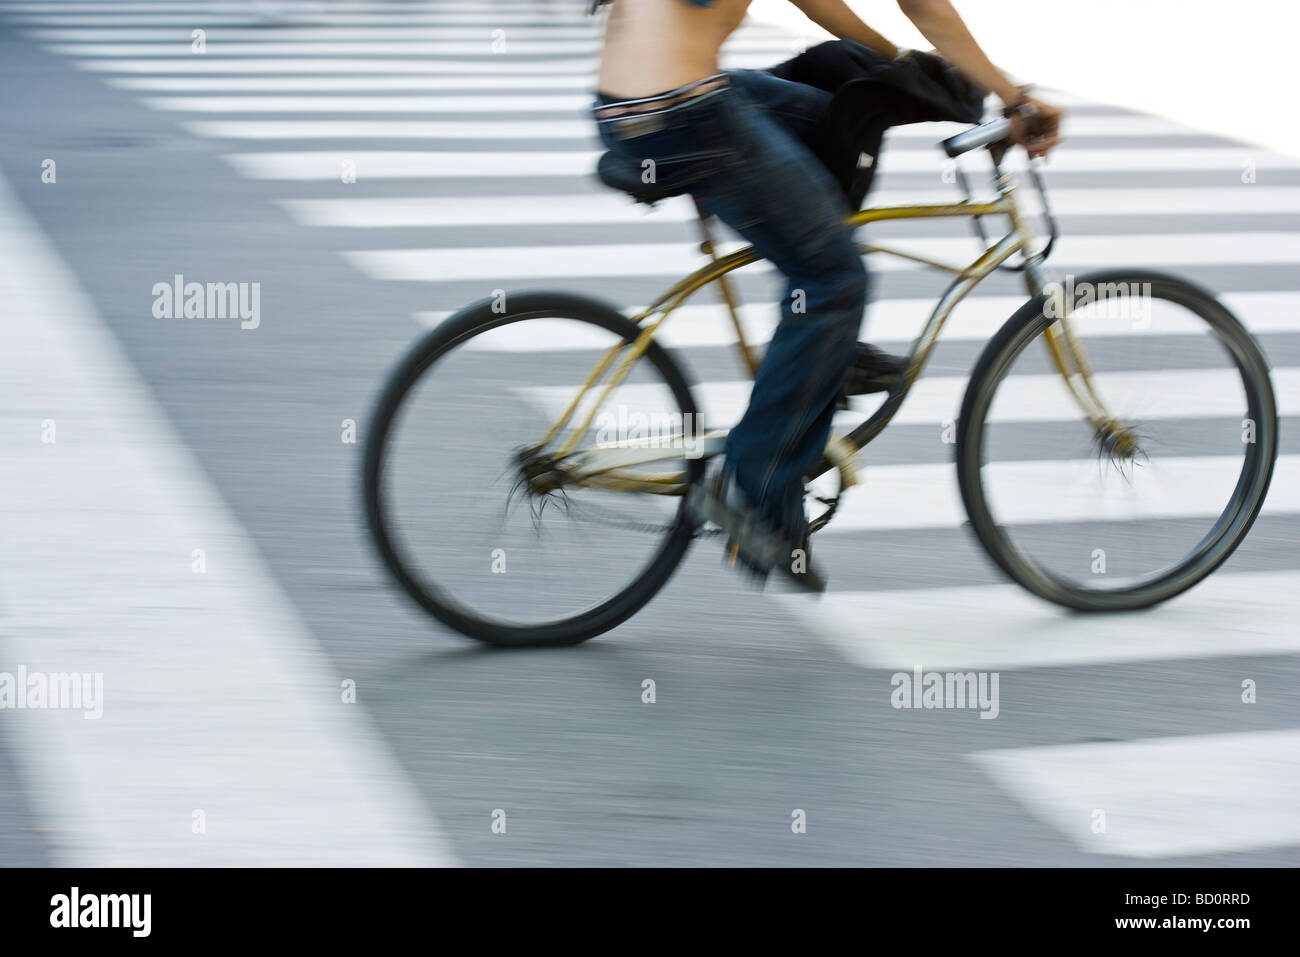 Person riding bicycle over crosswalk Stock Photo